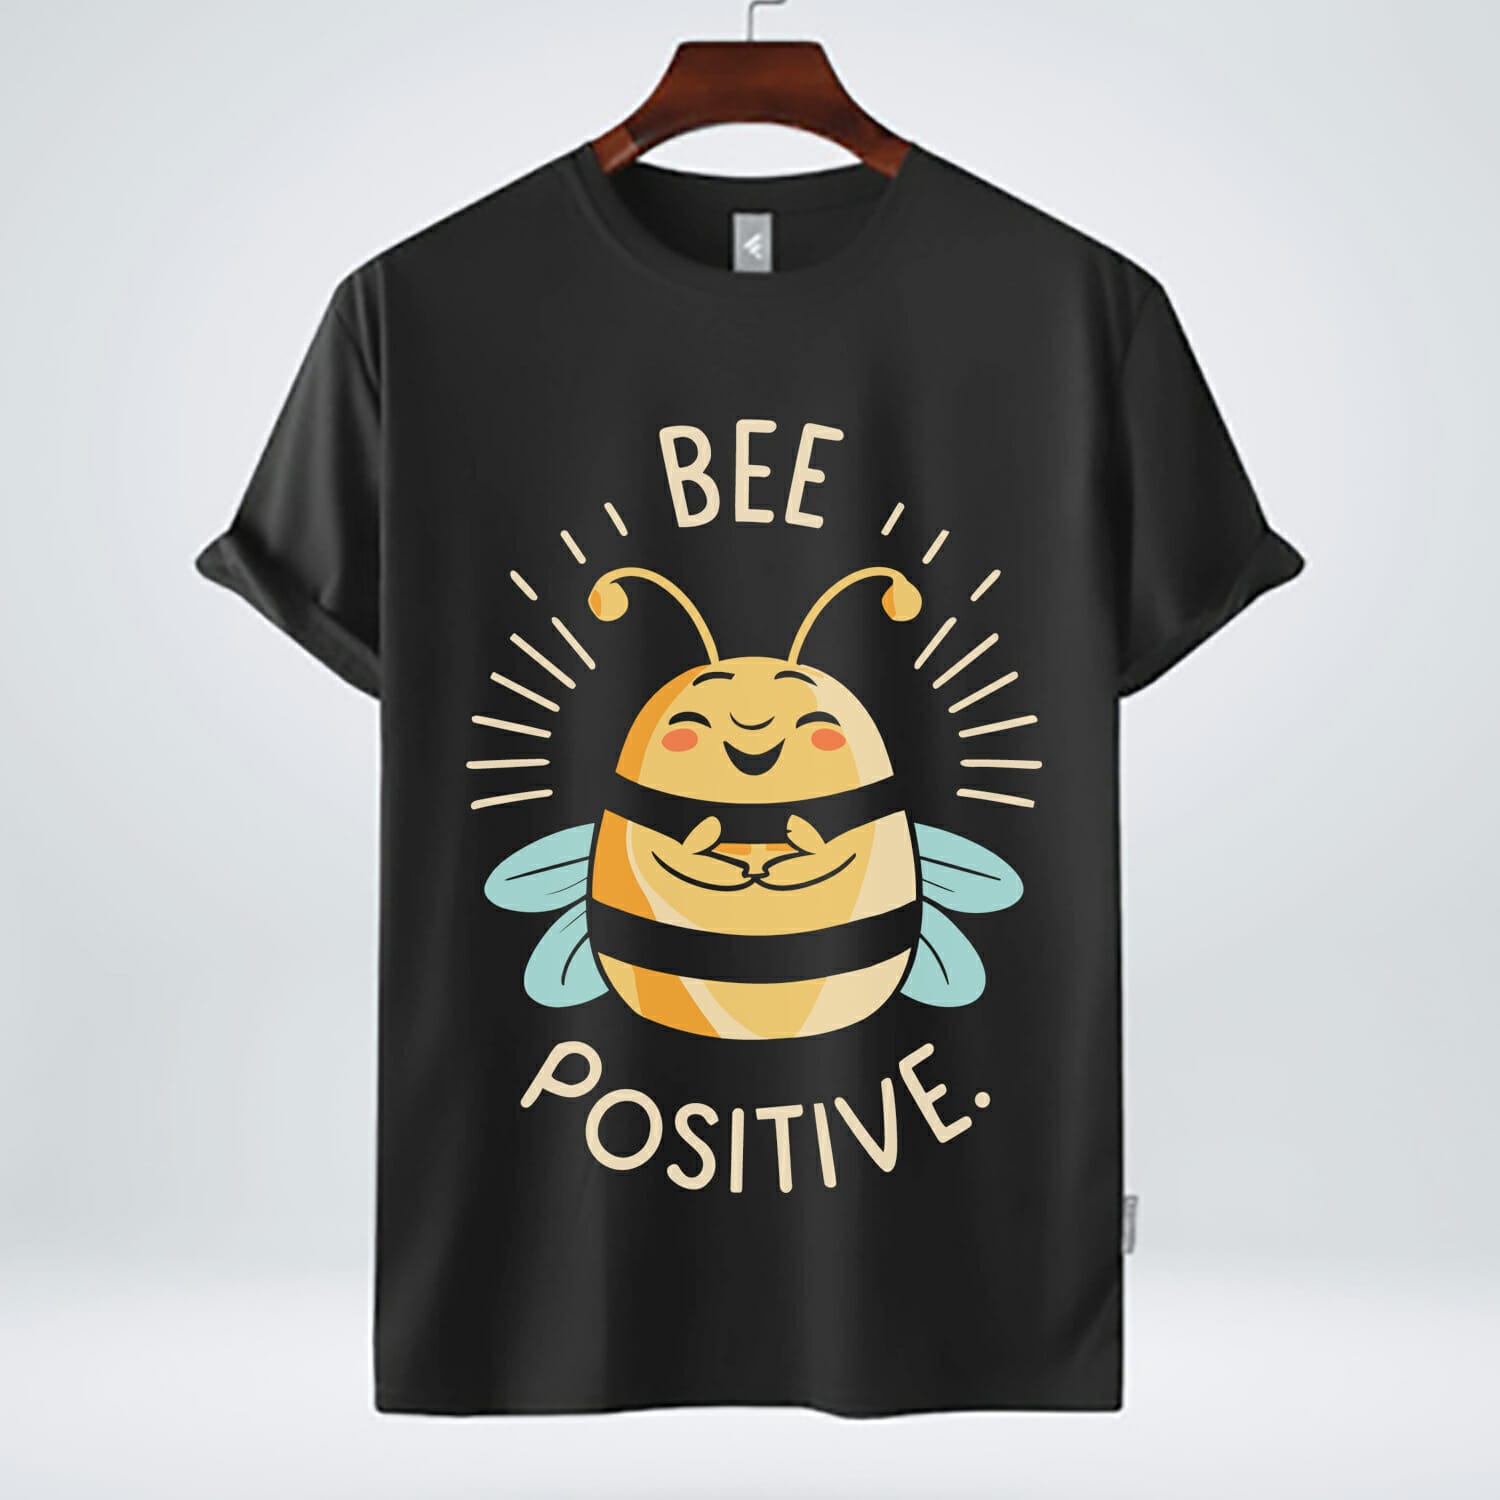 Bee Positive Free T-Shirt Design For Positive People